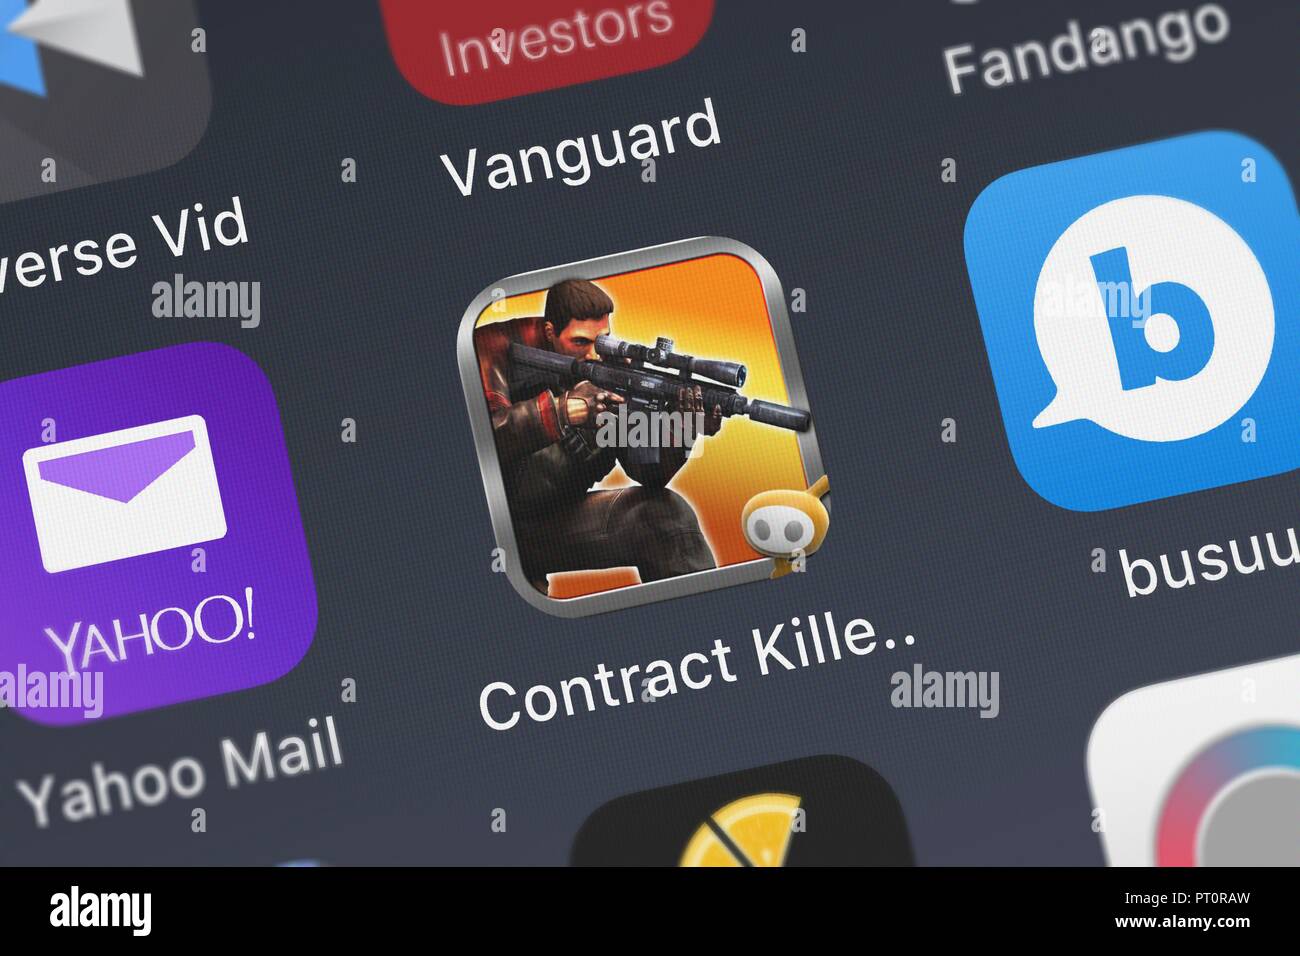 London, United Kingdom - October 05, 2018: Screenshot of the Contract Killer 2 mobile app from Glu Games Inc icon on an iPhone. Stock Photo